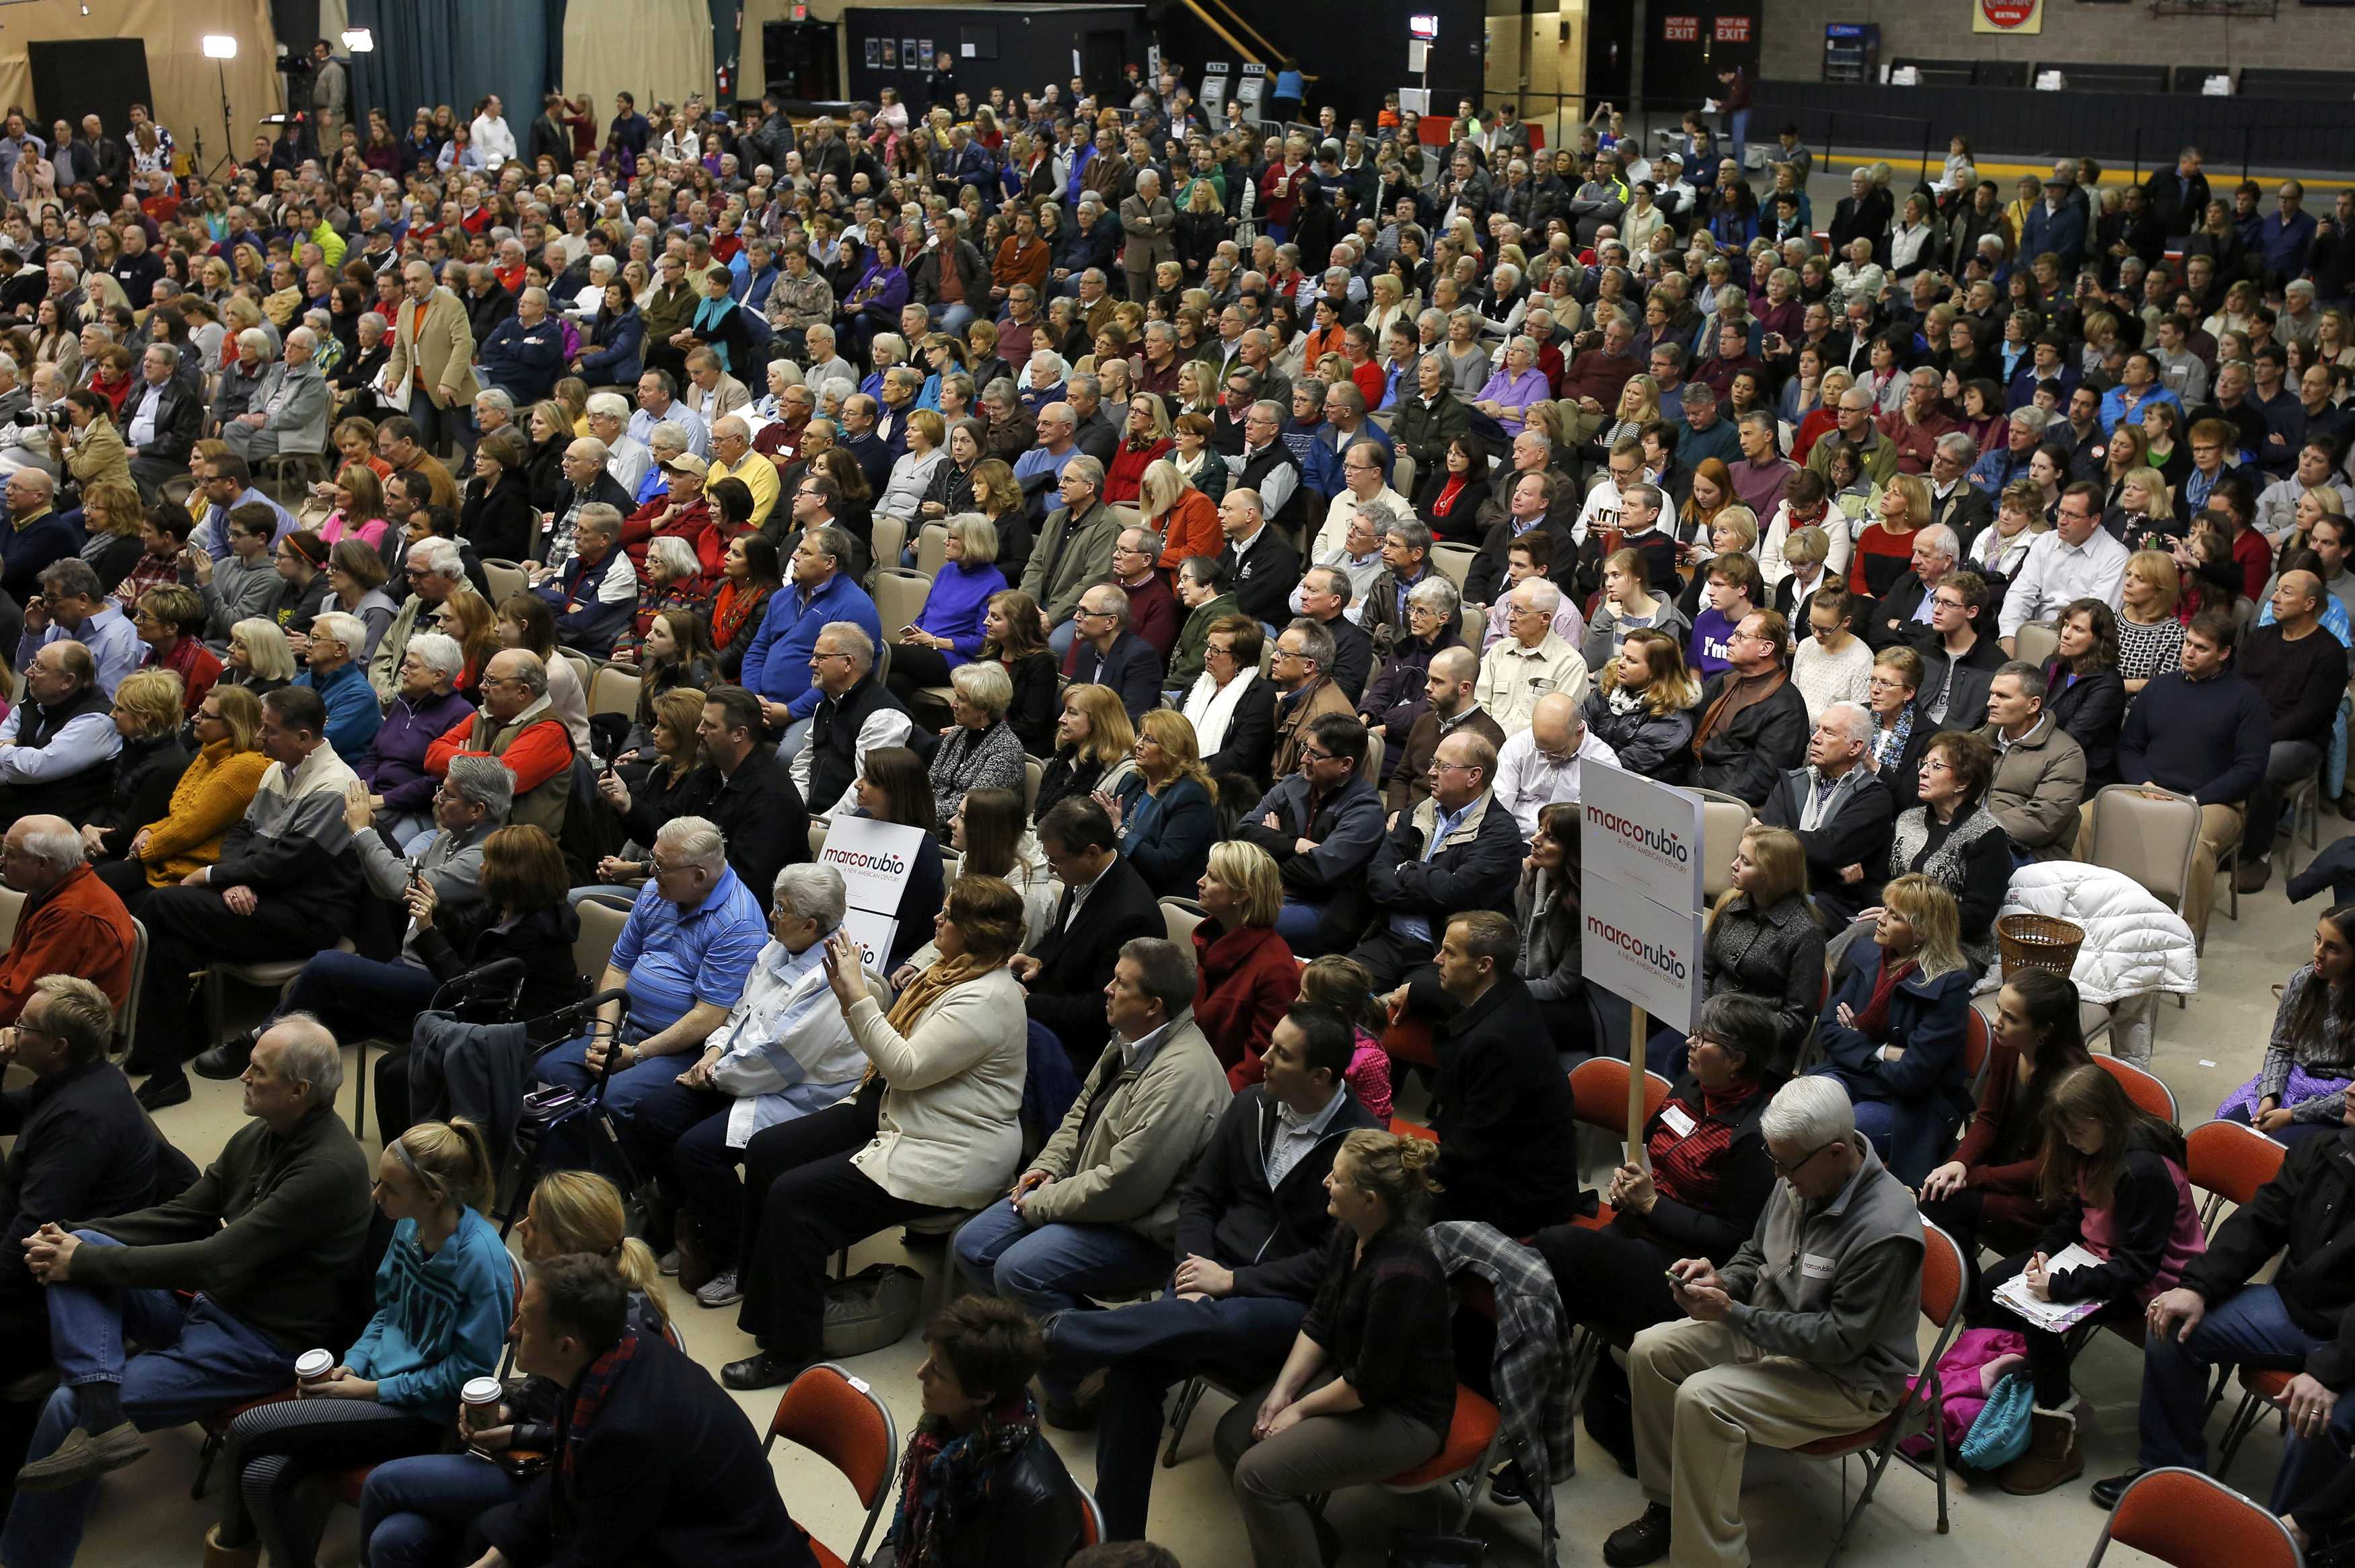 People gather to caucus at the Republican caucus at the 7 Flags Event Center in Clive, Iowa February 1, 2016.